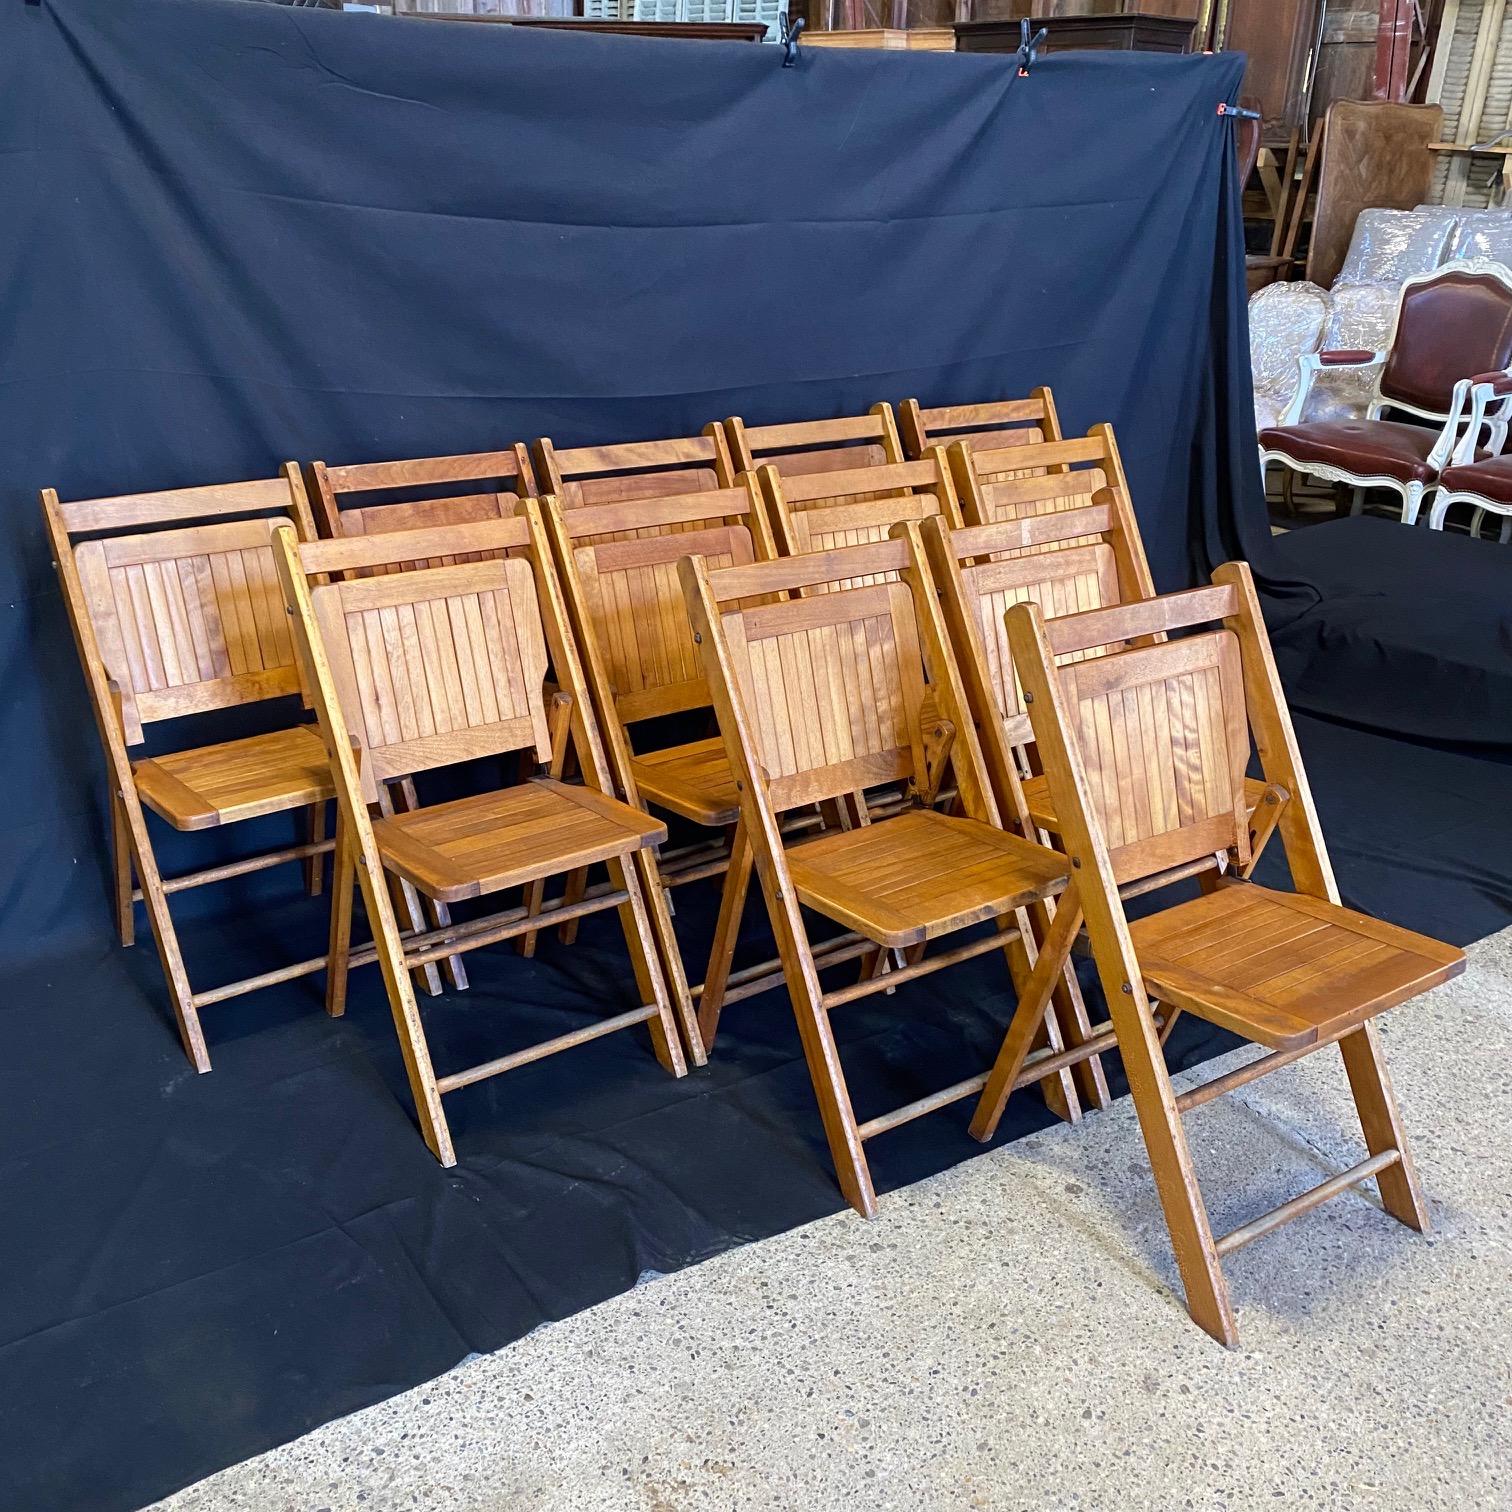 A set of very versatile vintage 1940s folding chairs in beech with brass details and marked Paris on the backs.   Paris Manufacturing Co., Maine
#2810